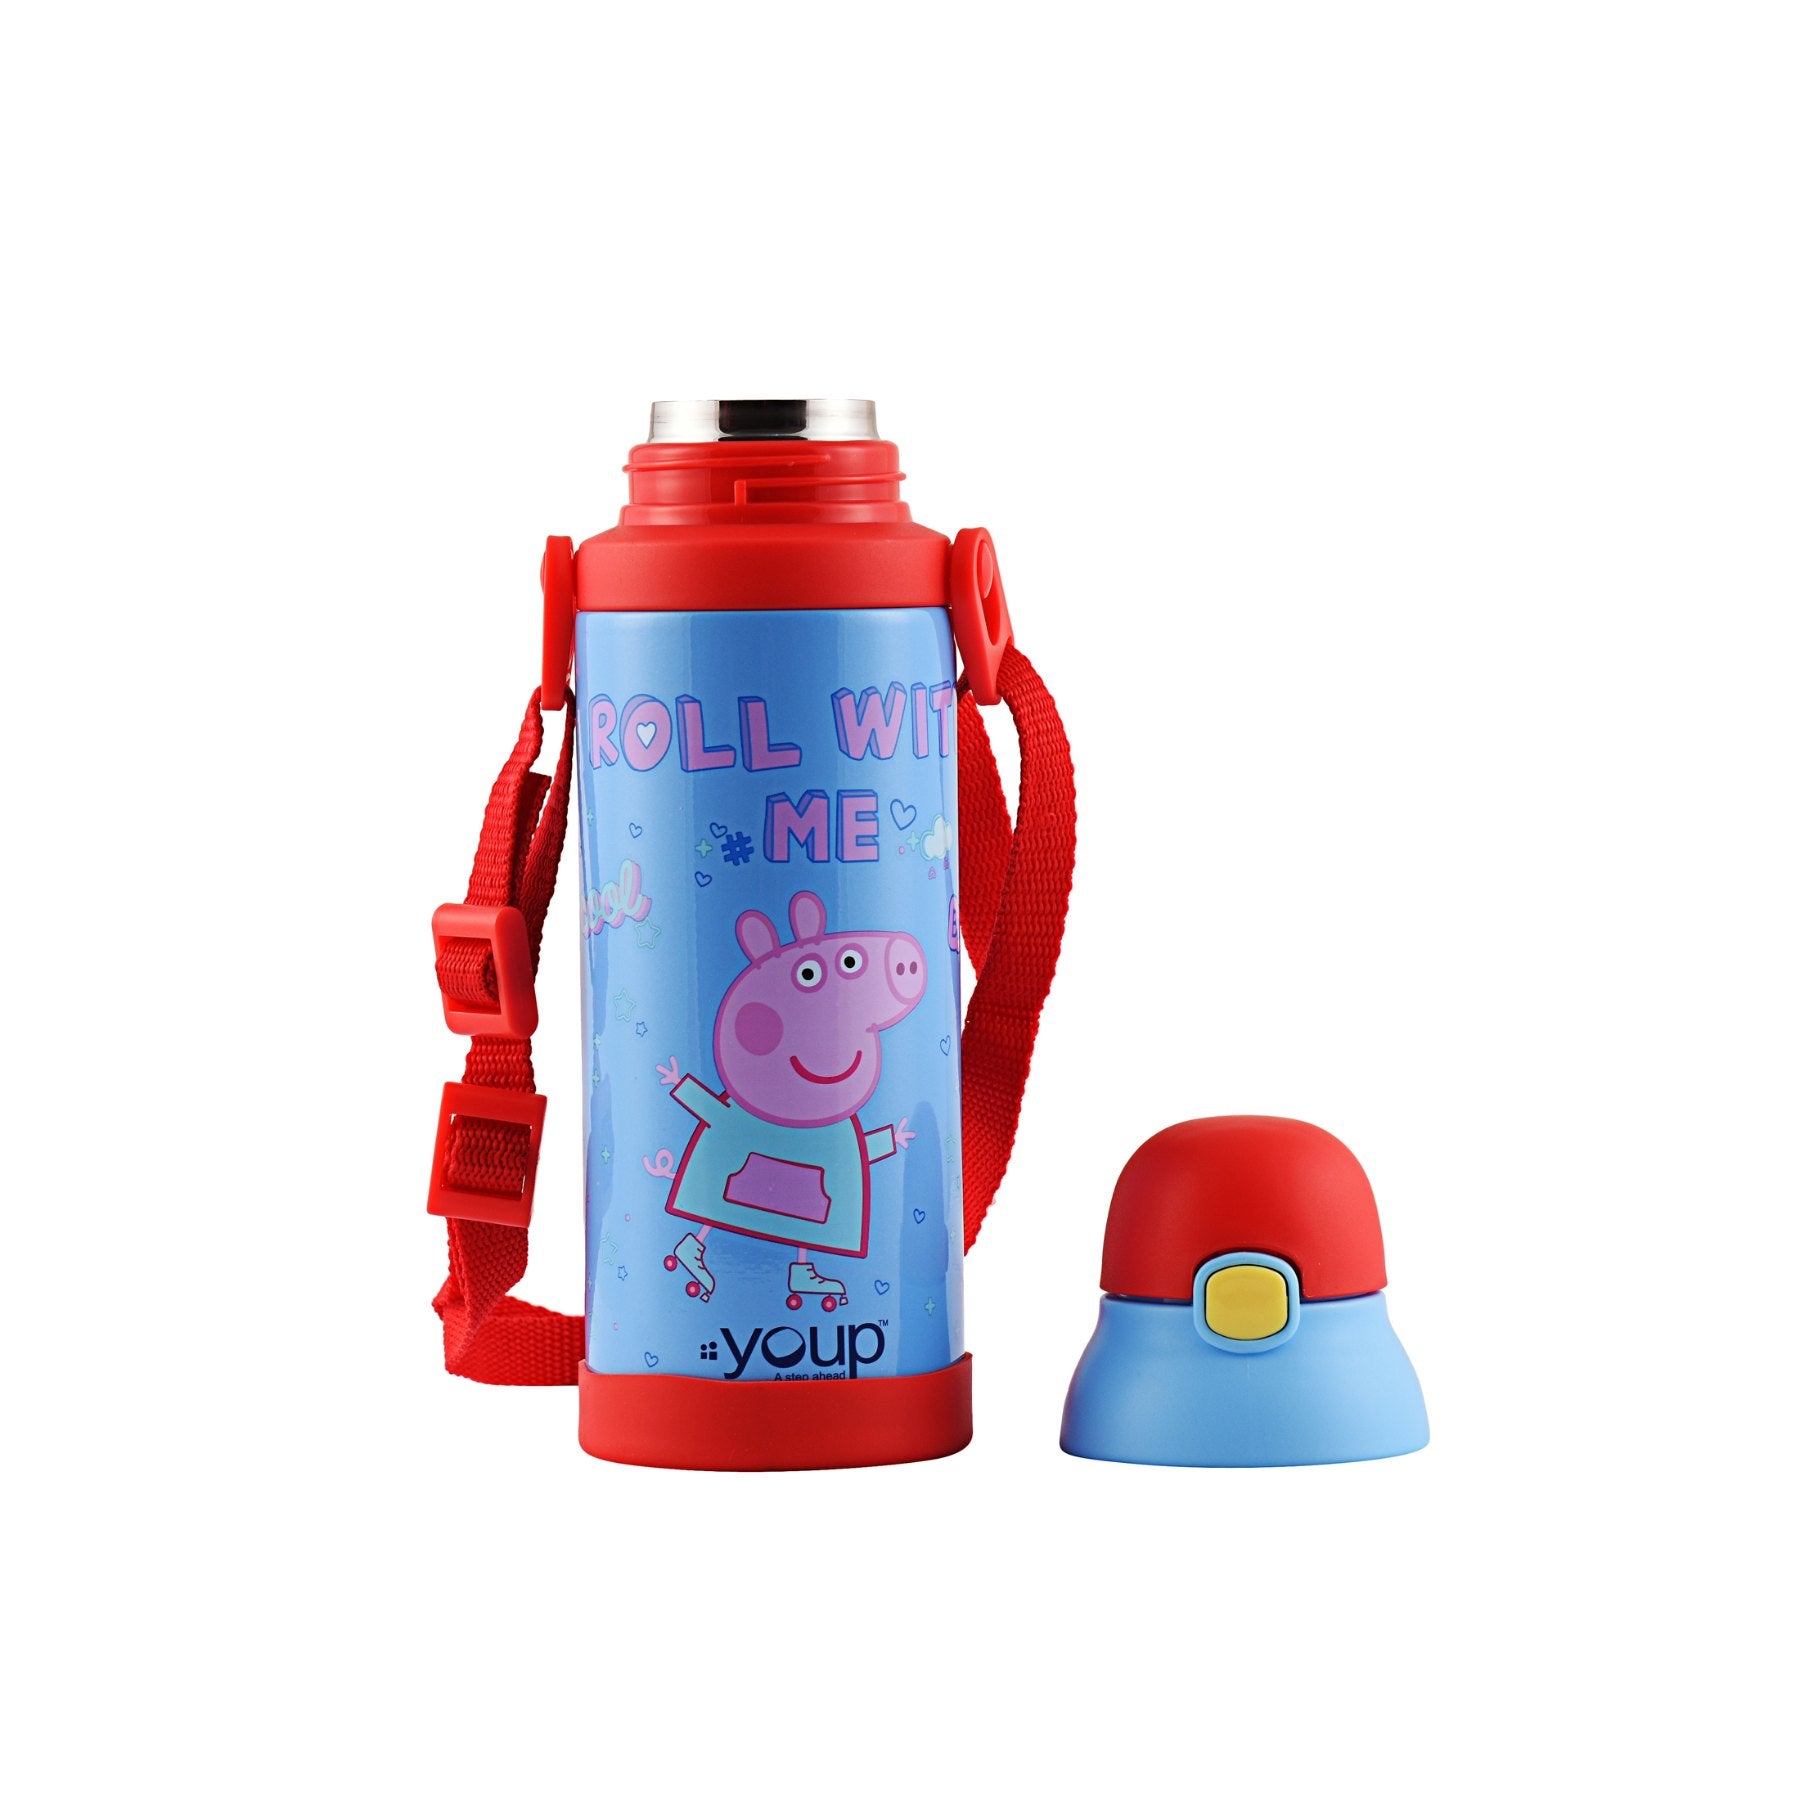 Youp Stainless Steel Insulated Orange Color Peppa Pig Kids Sipper Bottle Logan - 500 Ml